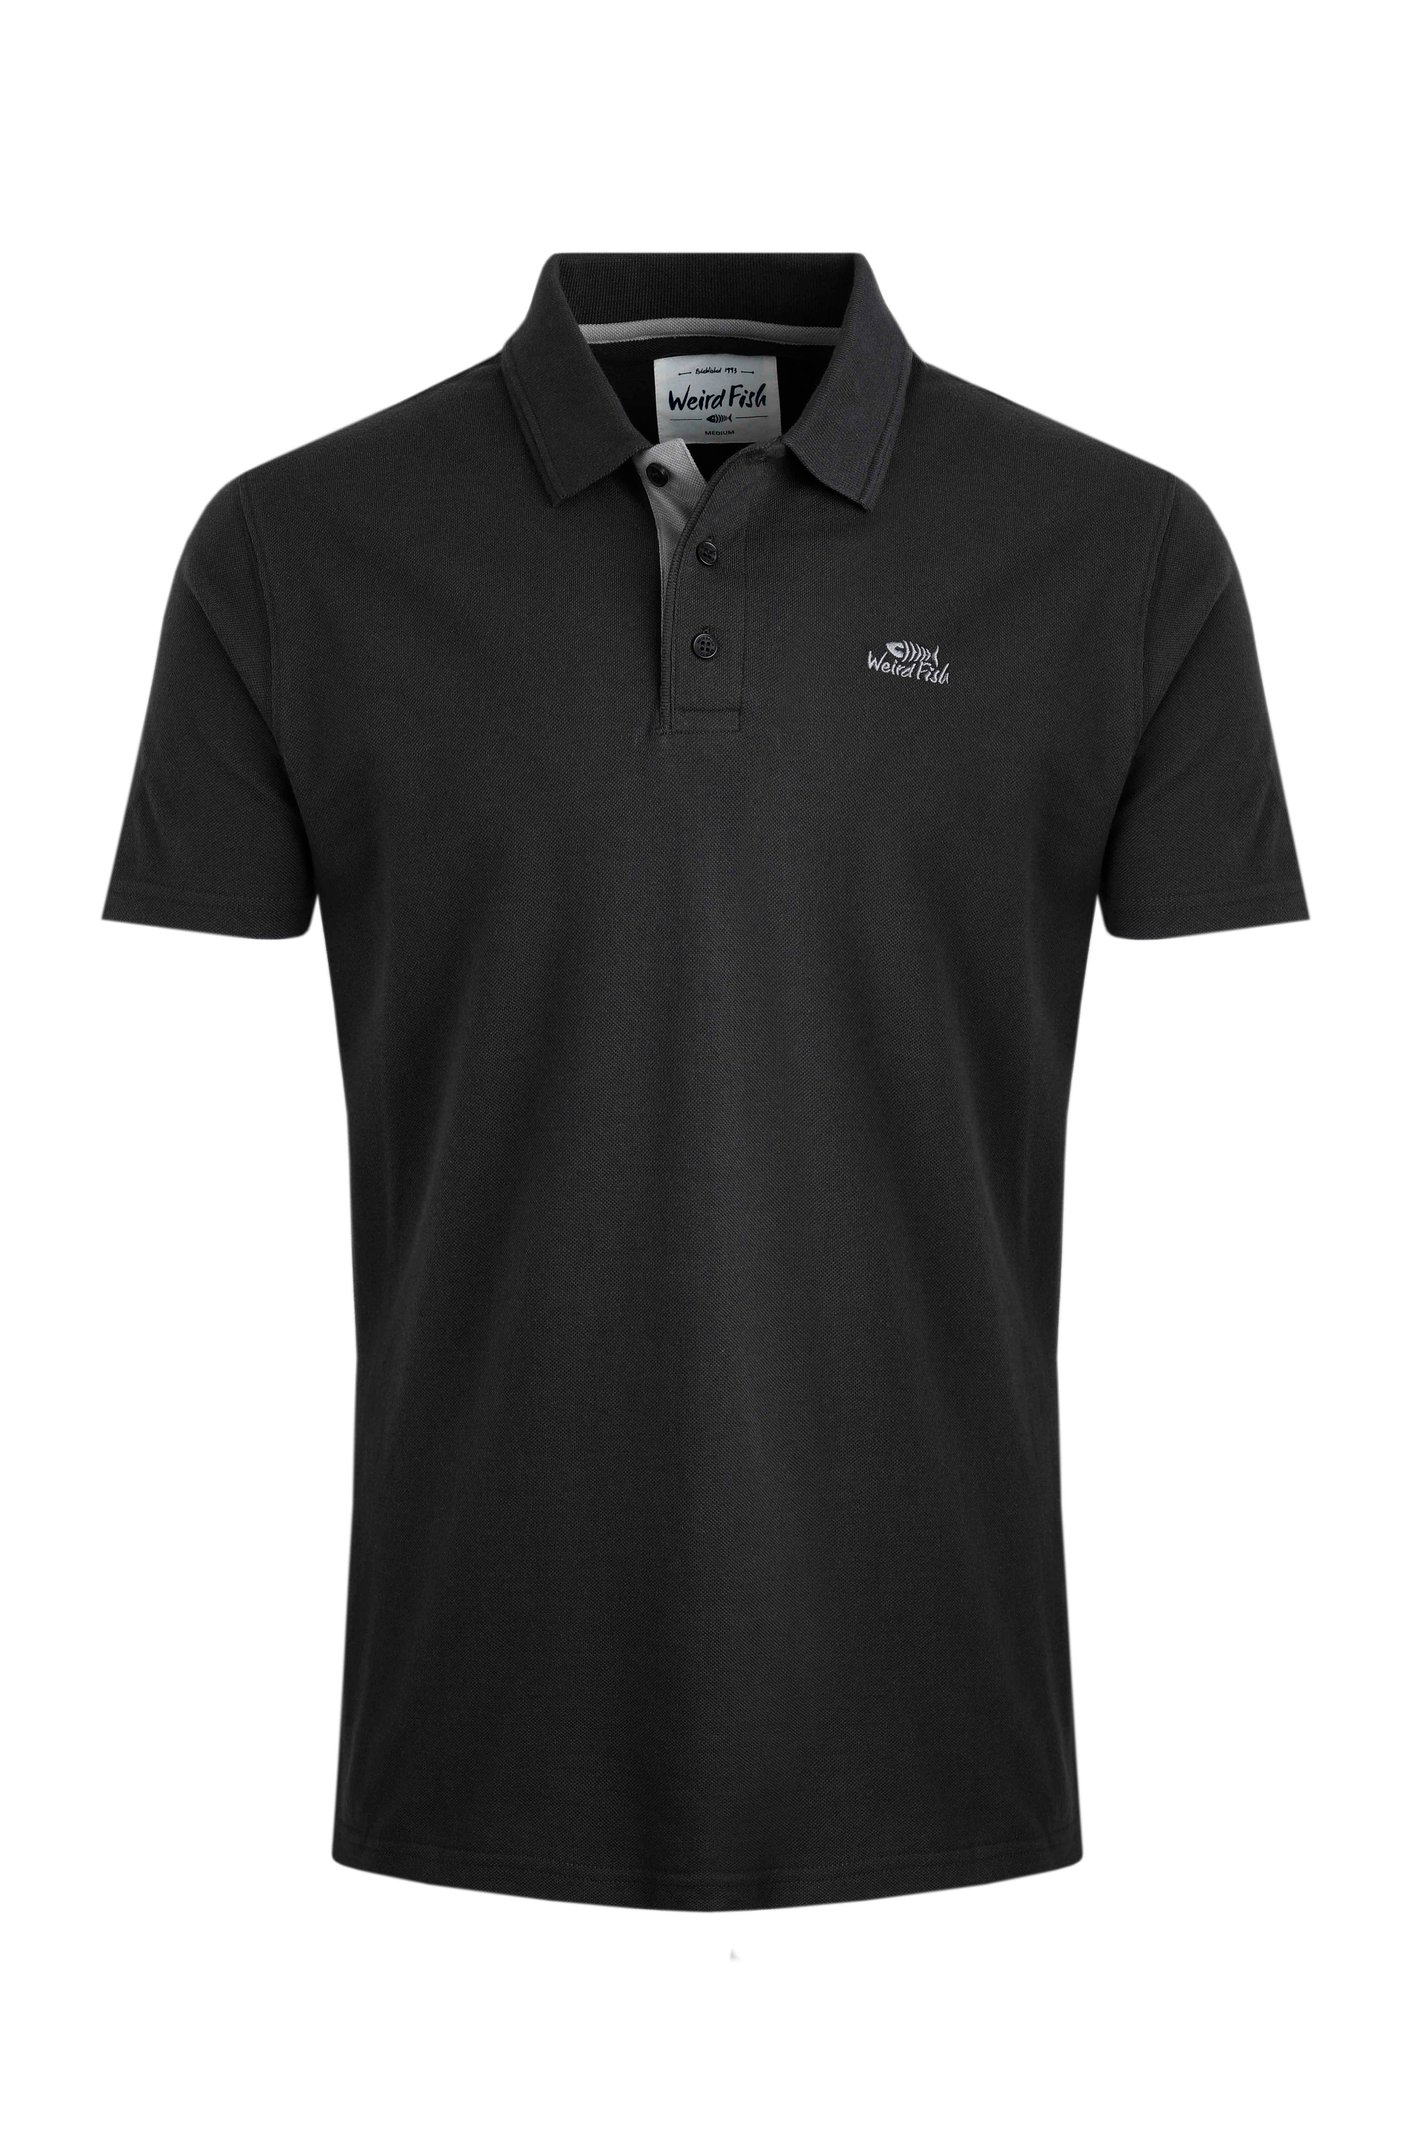 Weird Fish Miles Organic Pique Polo Washed Black Size S